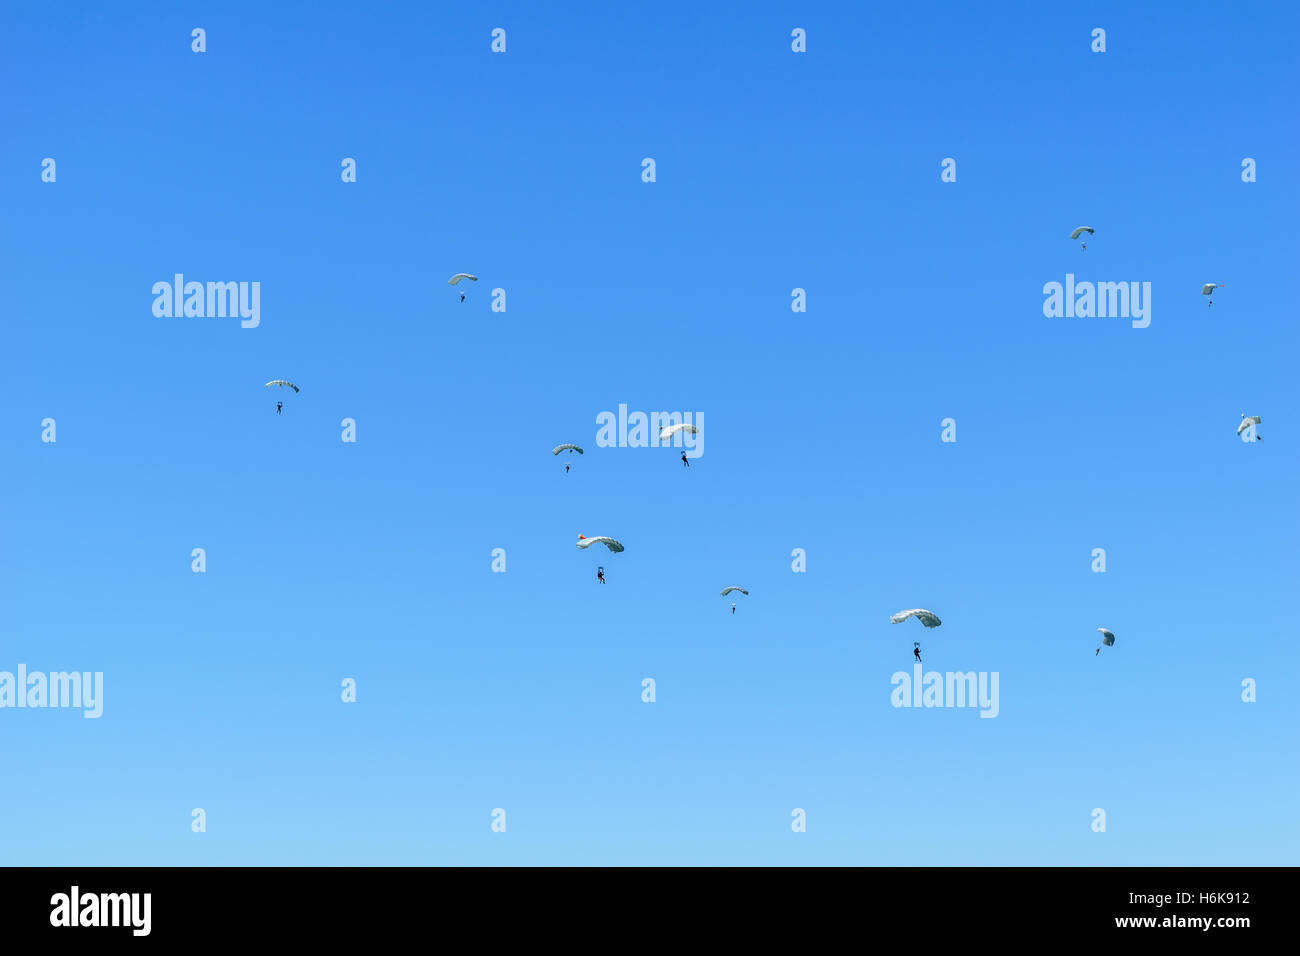 Paratroopers descend to earth on the blue clear sky background. Stock Photo